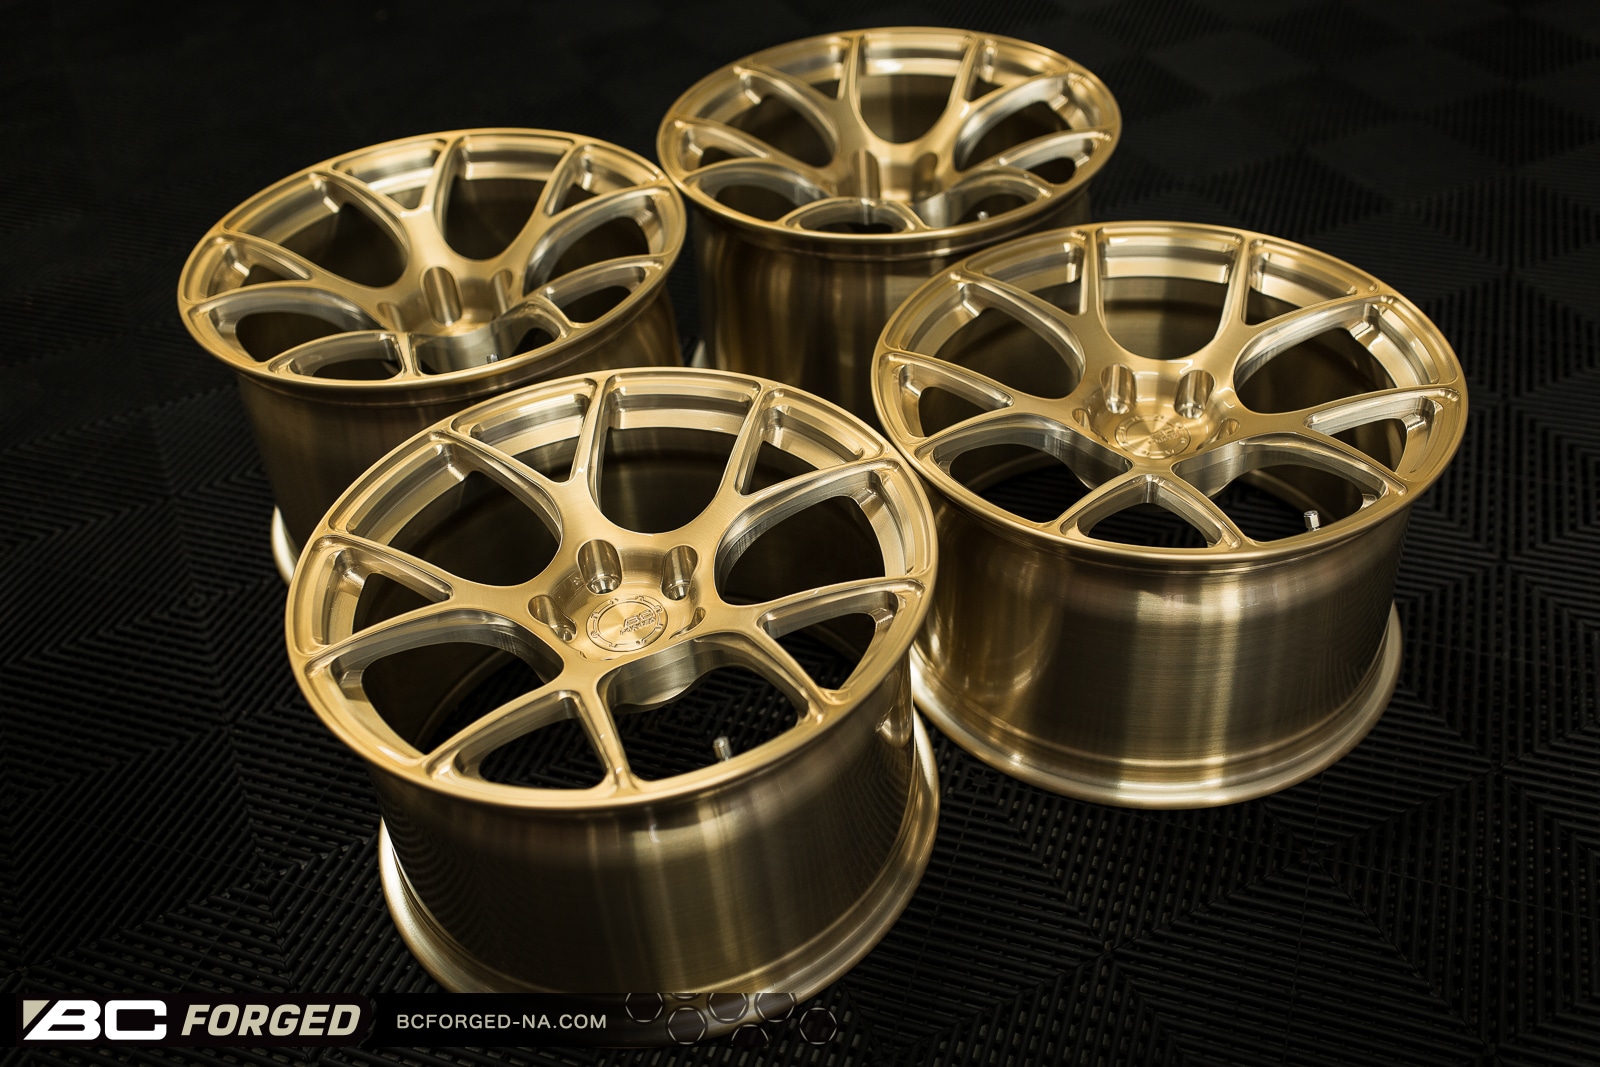 bc-forged-rz05-forged-monoblock-concave-brushed-royal-gold-wheels.jpg